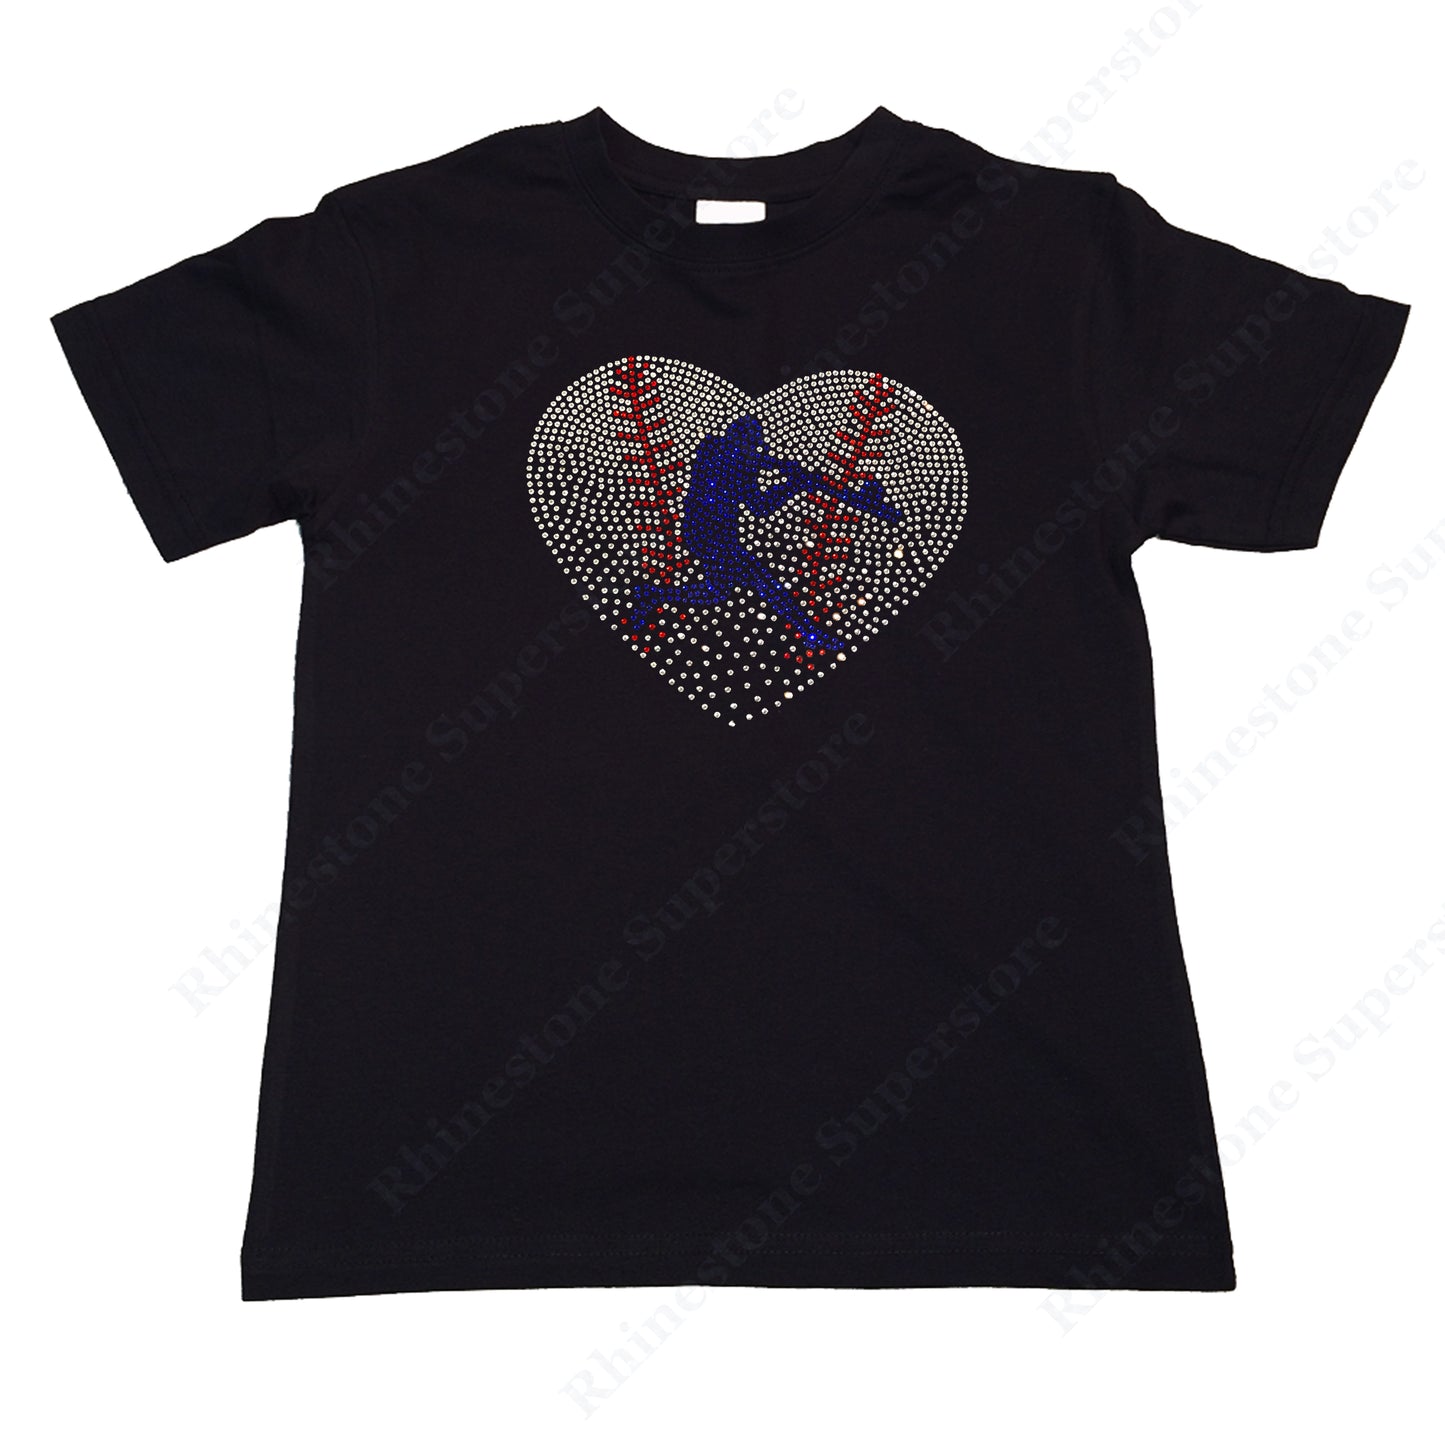 Girls Rhinestone T-Shirt " Baseball Heart with Batter in Rhinestones " Kids Size 3 to 14 Available